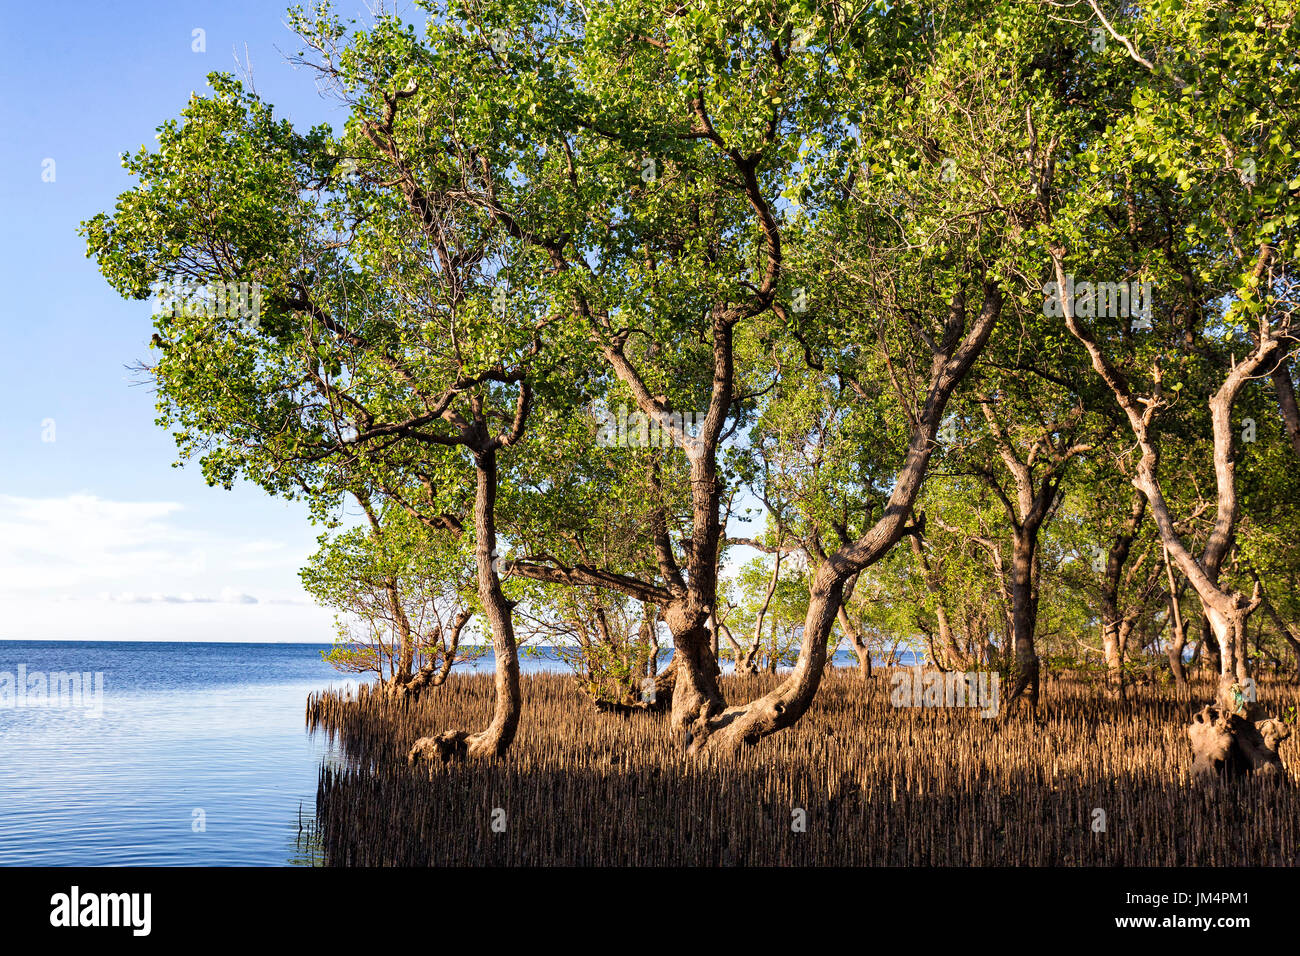 A mangrove forest just outside of Maumere on Flores island in Indonesia. Stock Photo